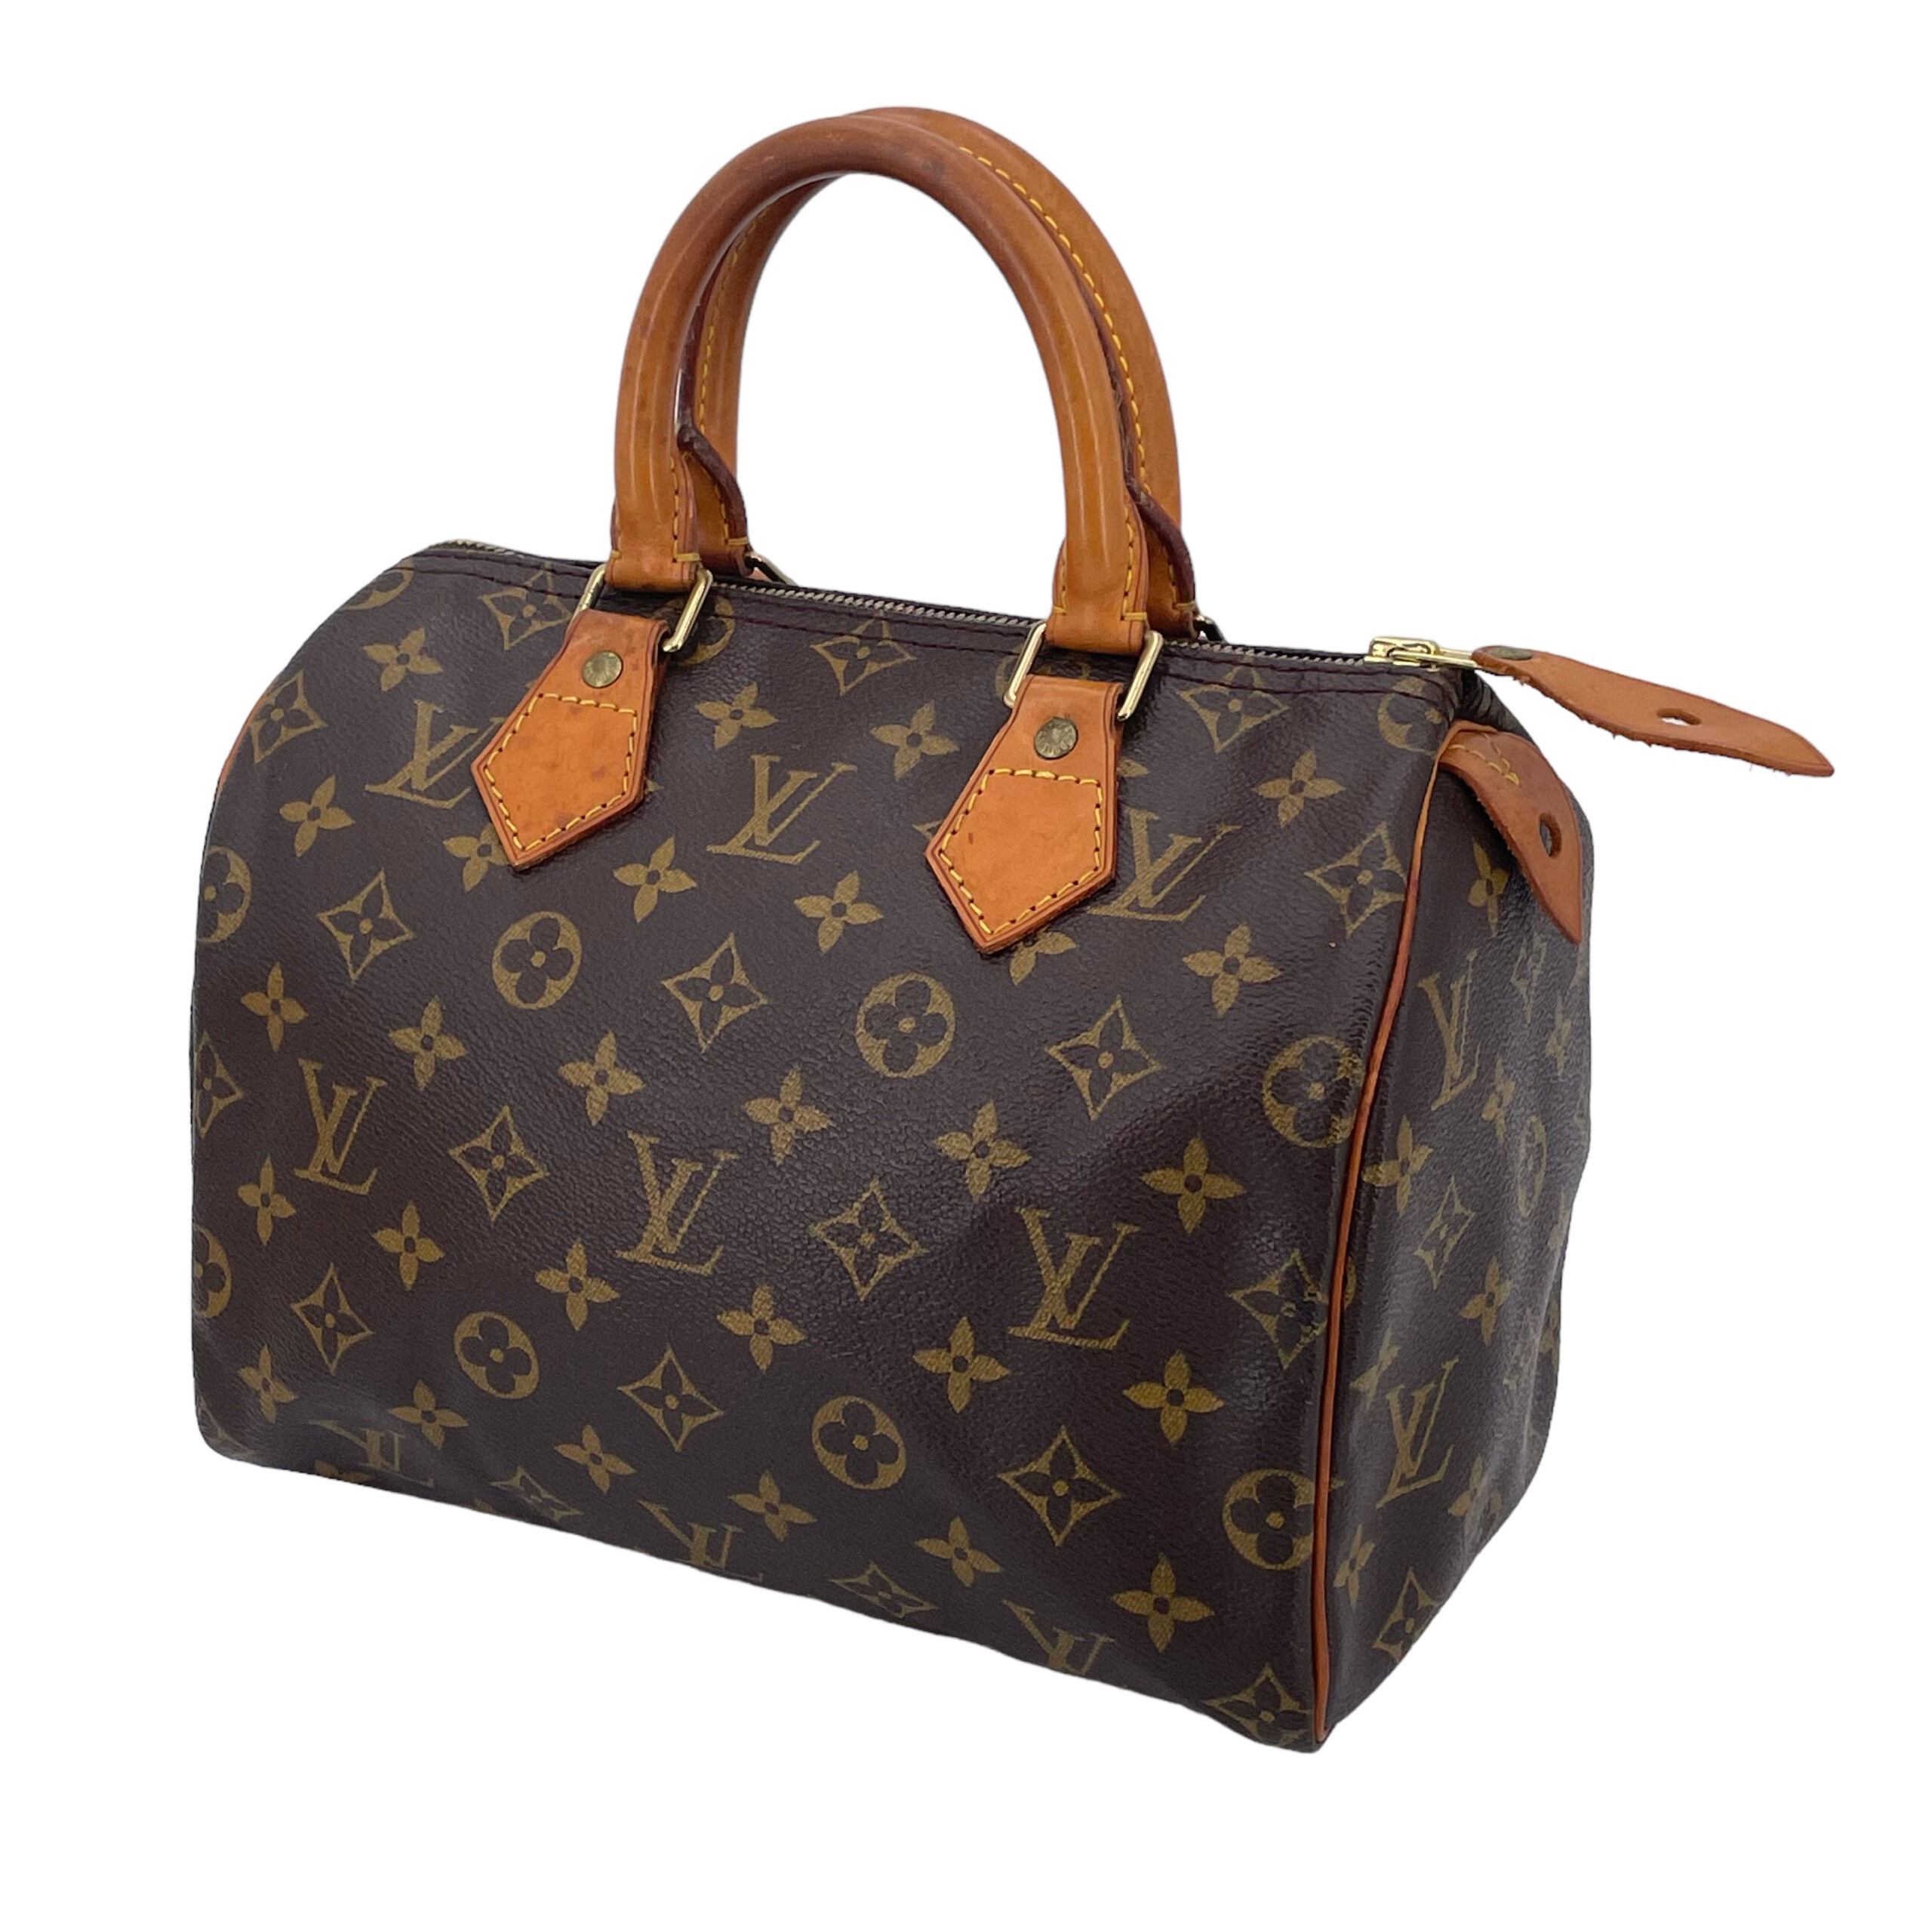 Keepall Bandoulière 25 (Blown Up) Monogram Other - Travel